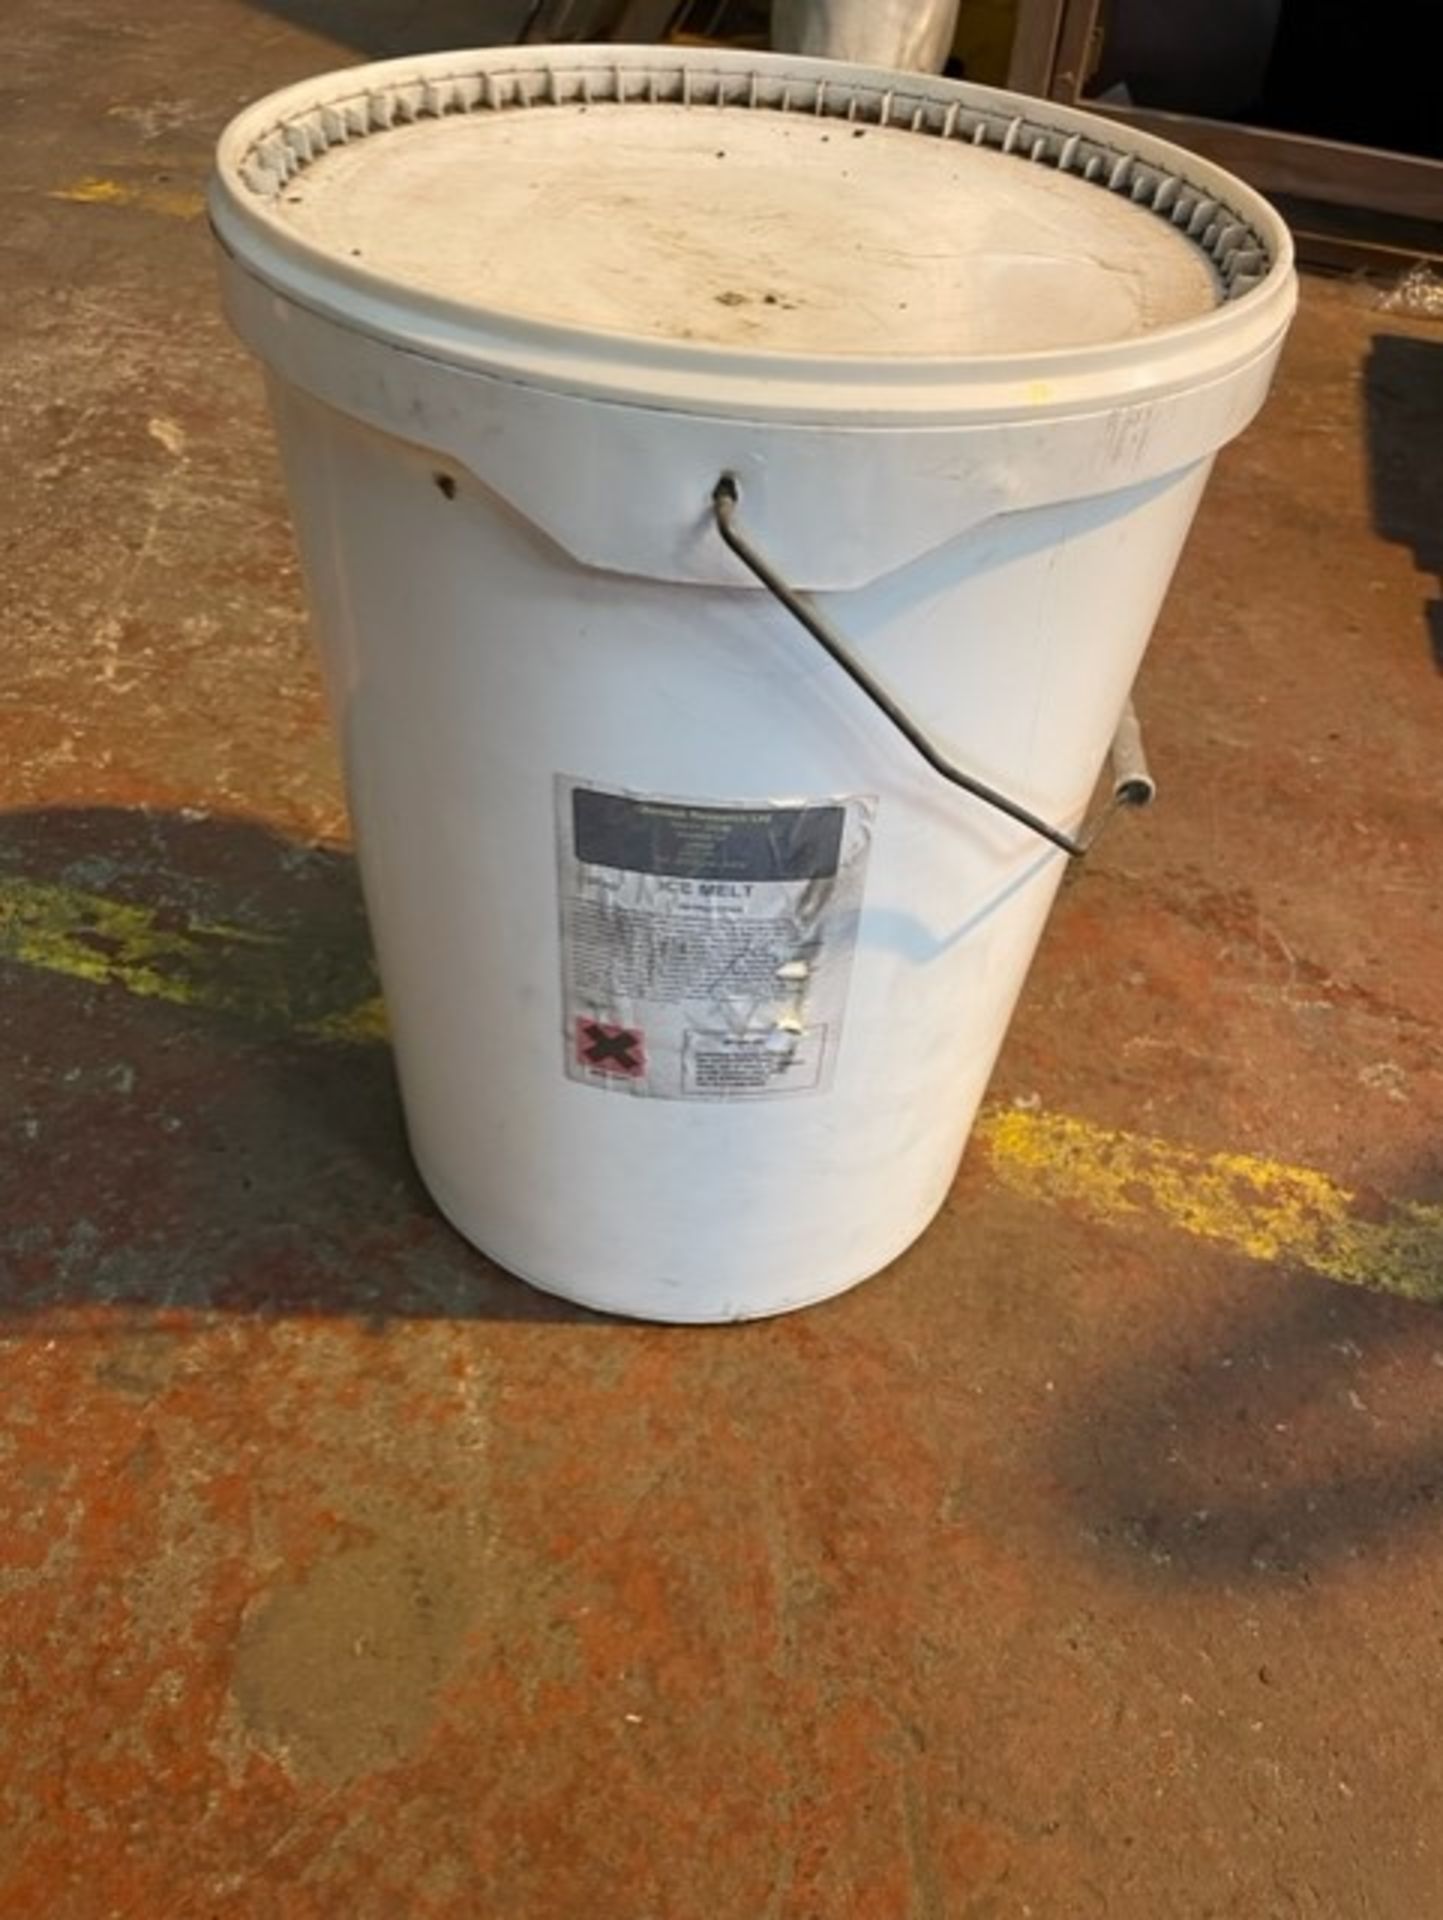 2 x 20kg buckets of ice melt chemical, expensive to buy - Image 2 of 2